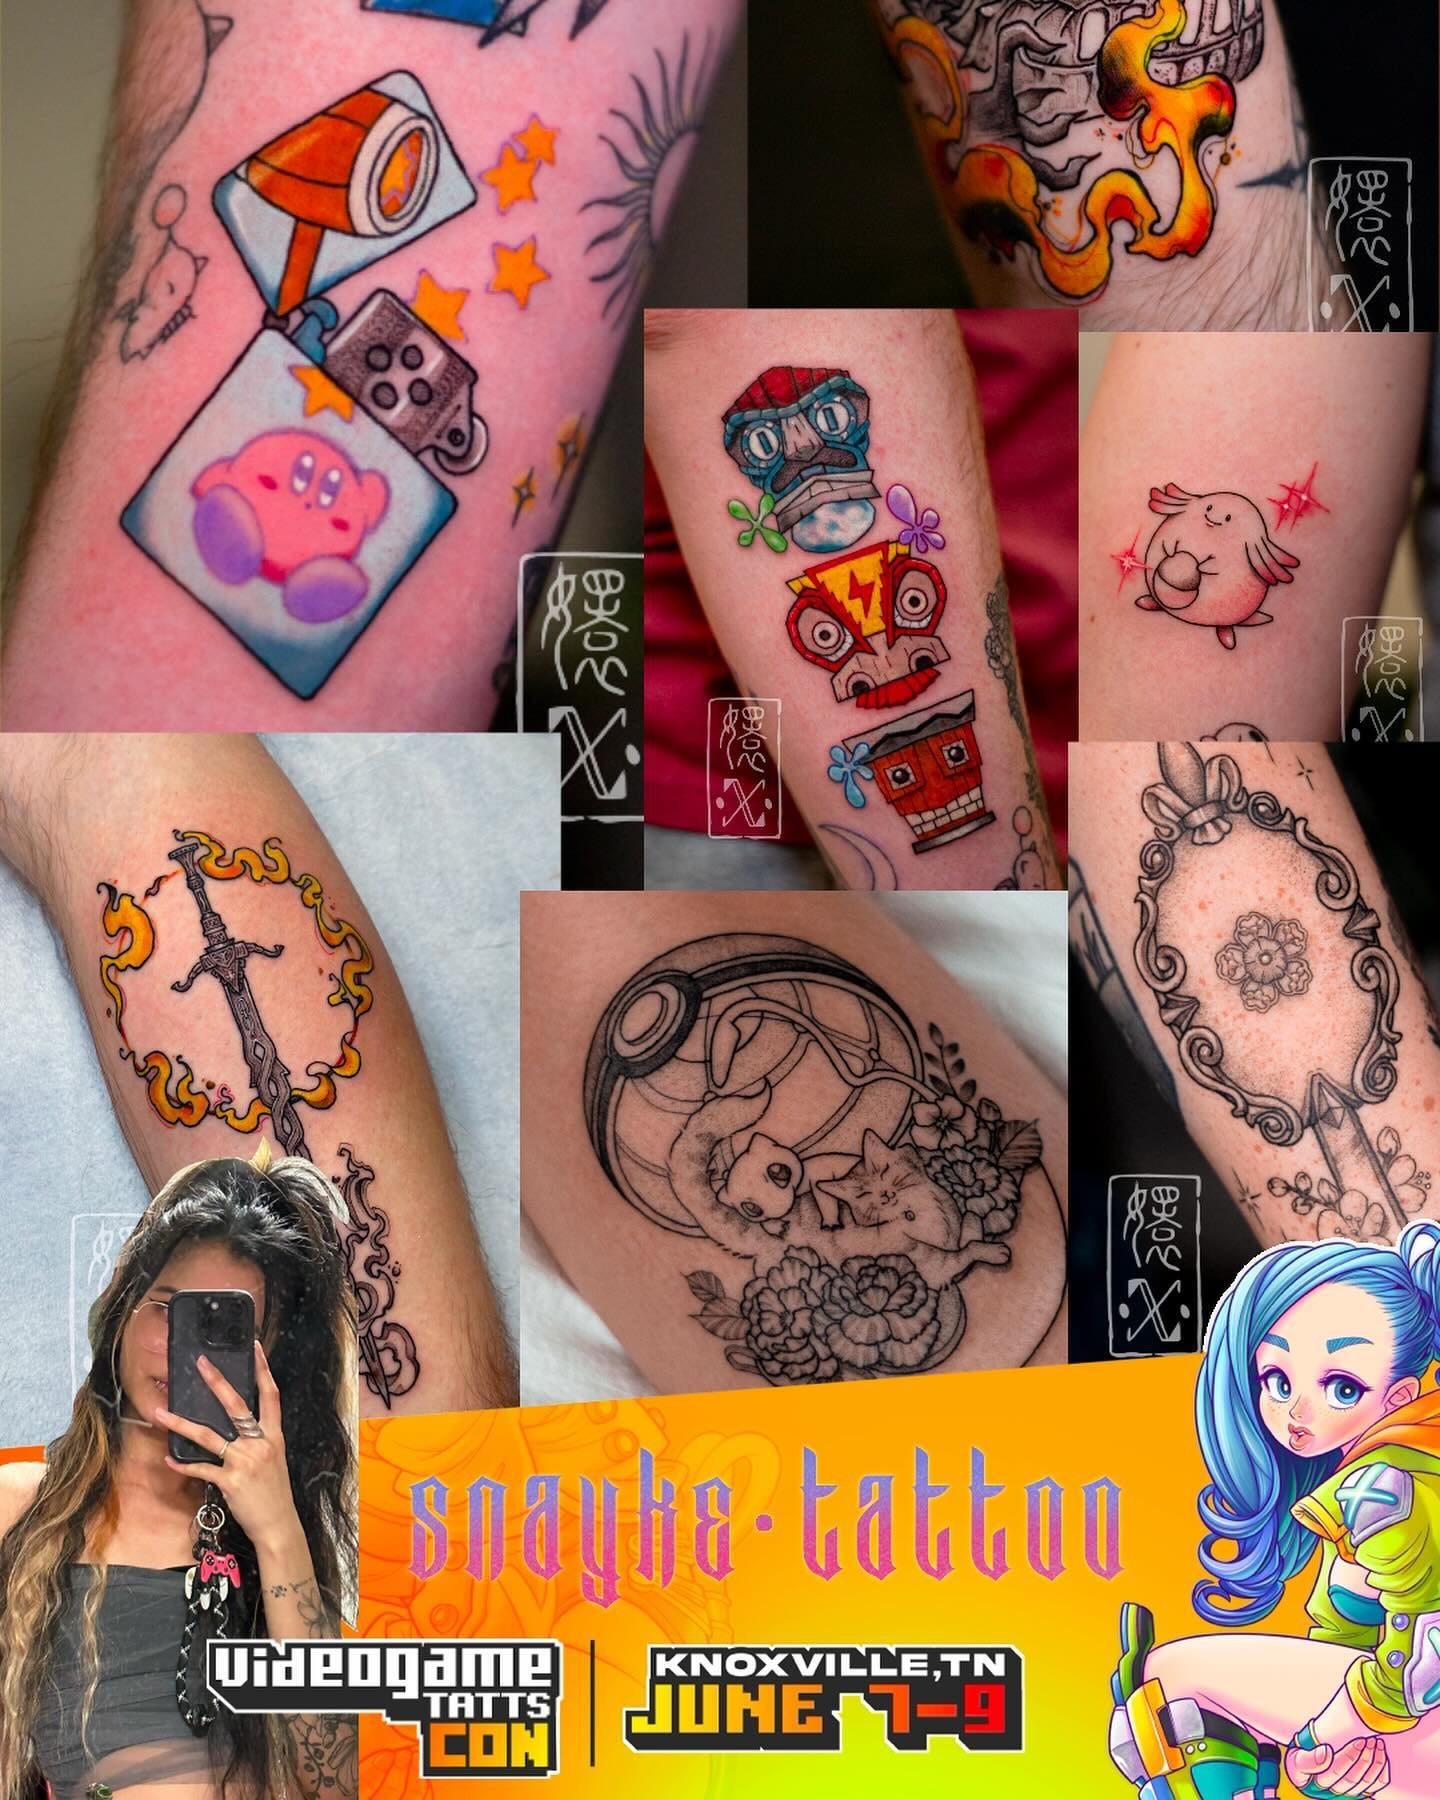 ✨ ✨ Hey hey hey Knoxville! I will be attending @vgt_con from June 7-9th, I have some slots booked and some slots open. Let&rsquo;s get you tattooed, new friends ✨ ✨ 

I will also be selling my charms n stickers while supplies last (last slide if you 